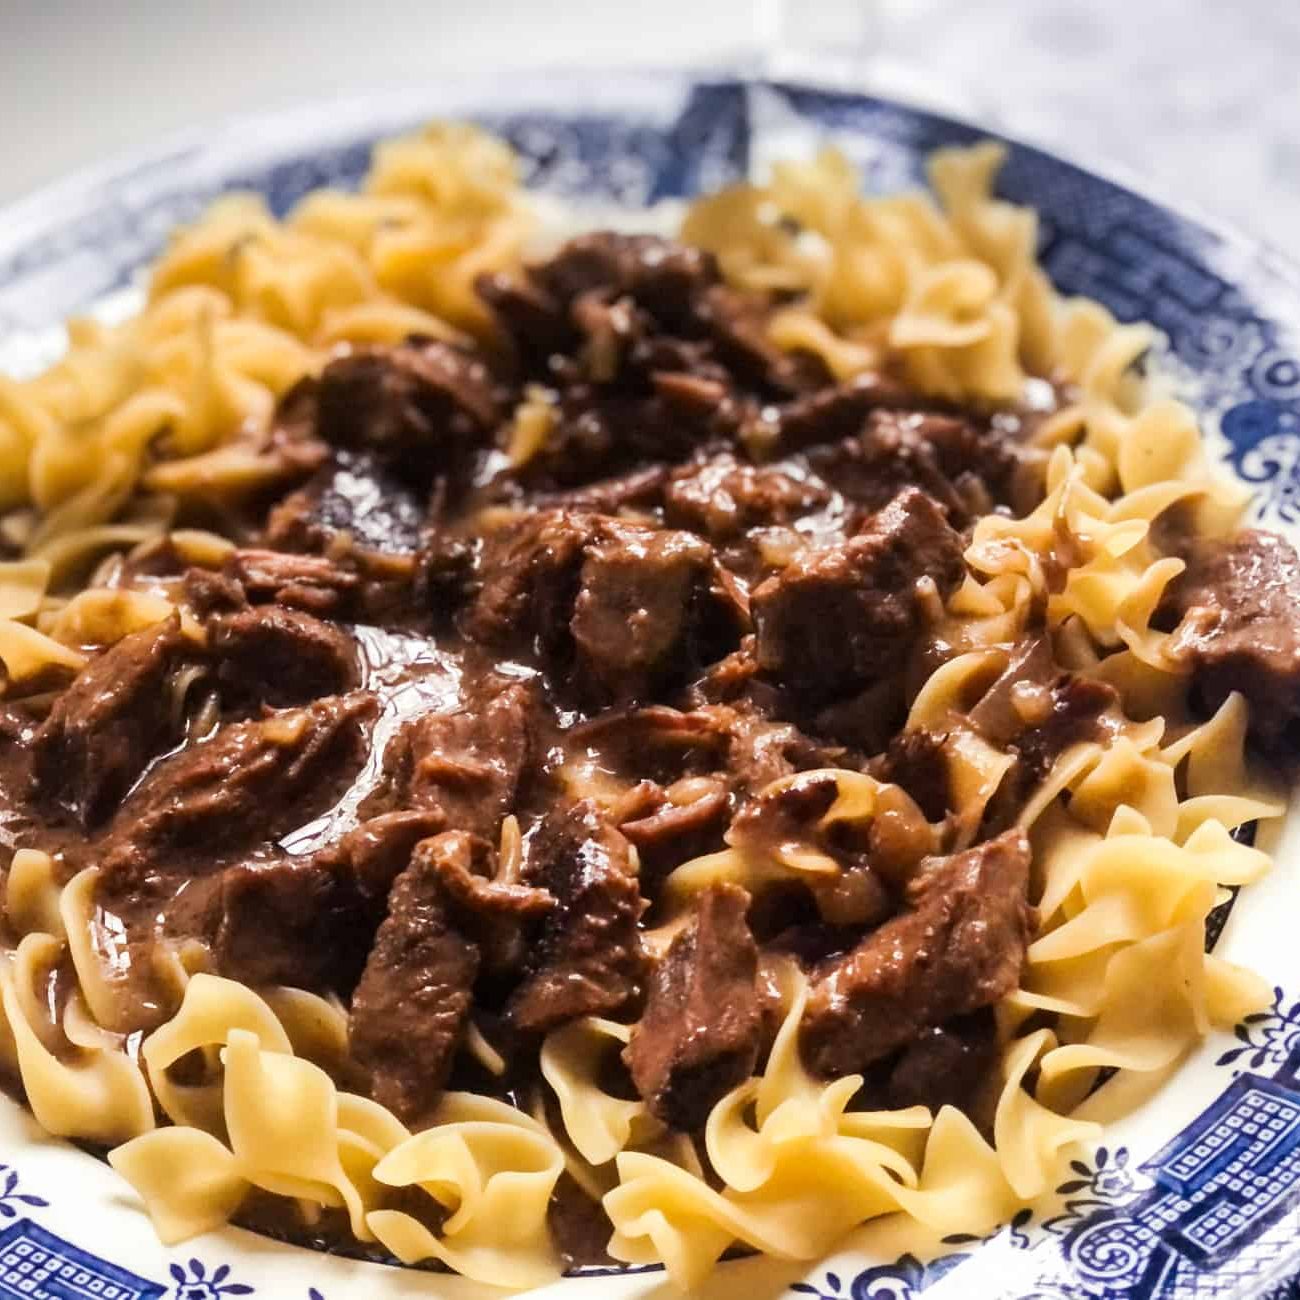 The coziest, creamiest beef tips with egg noodles